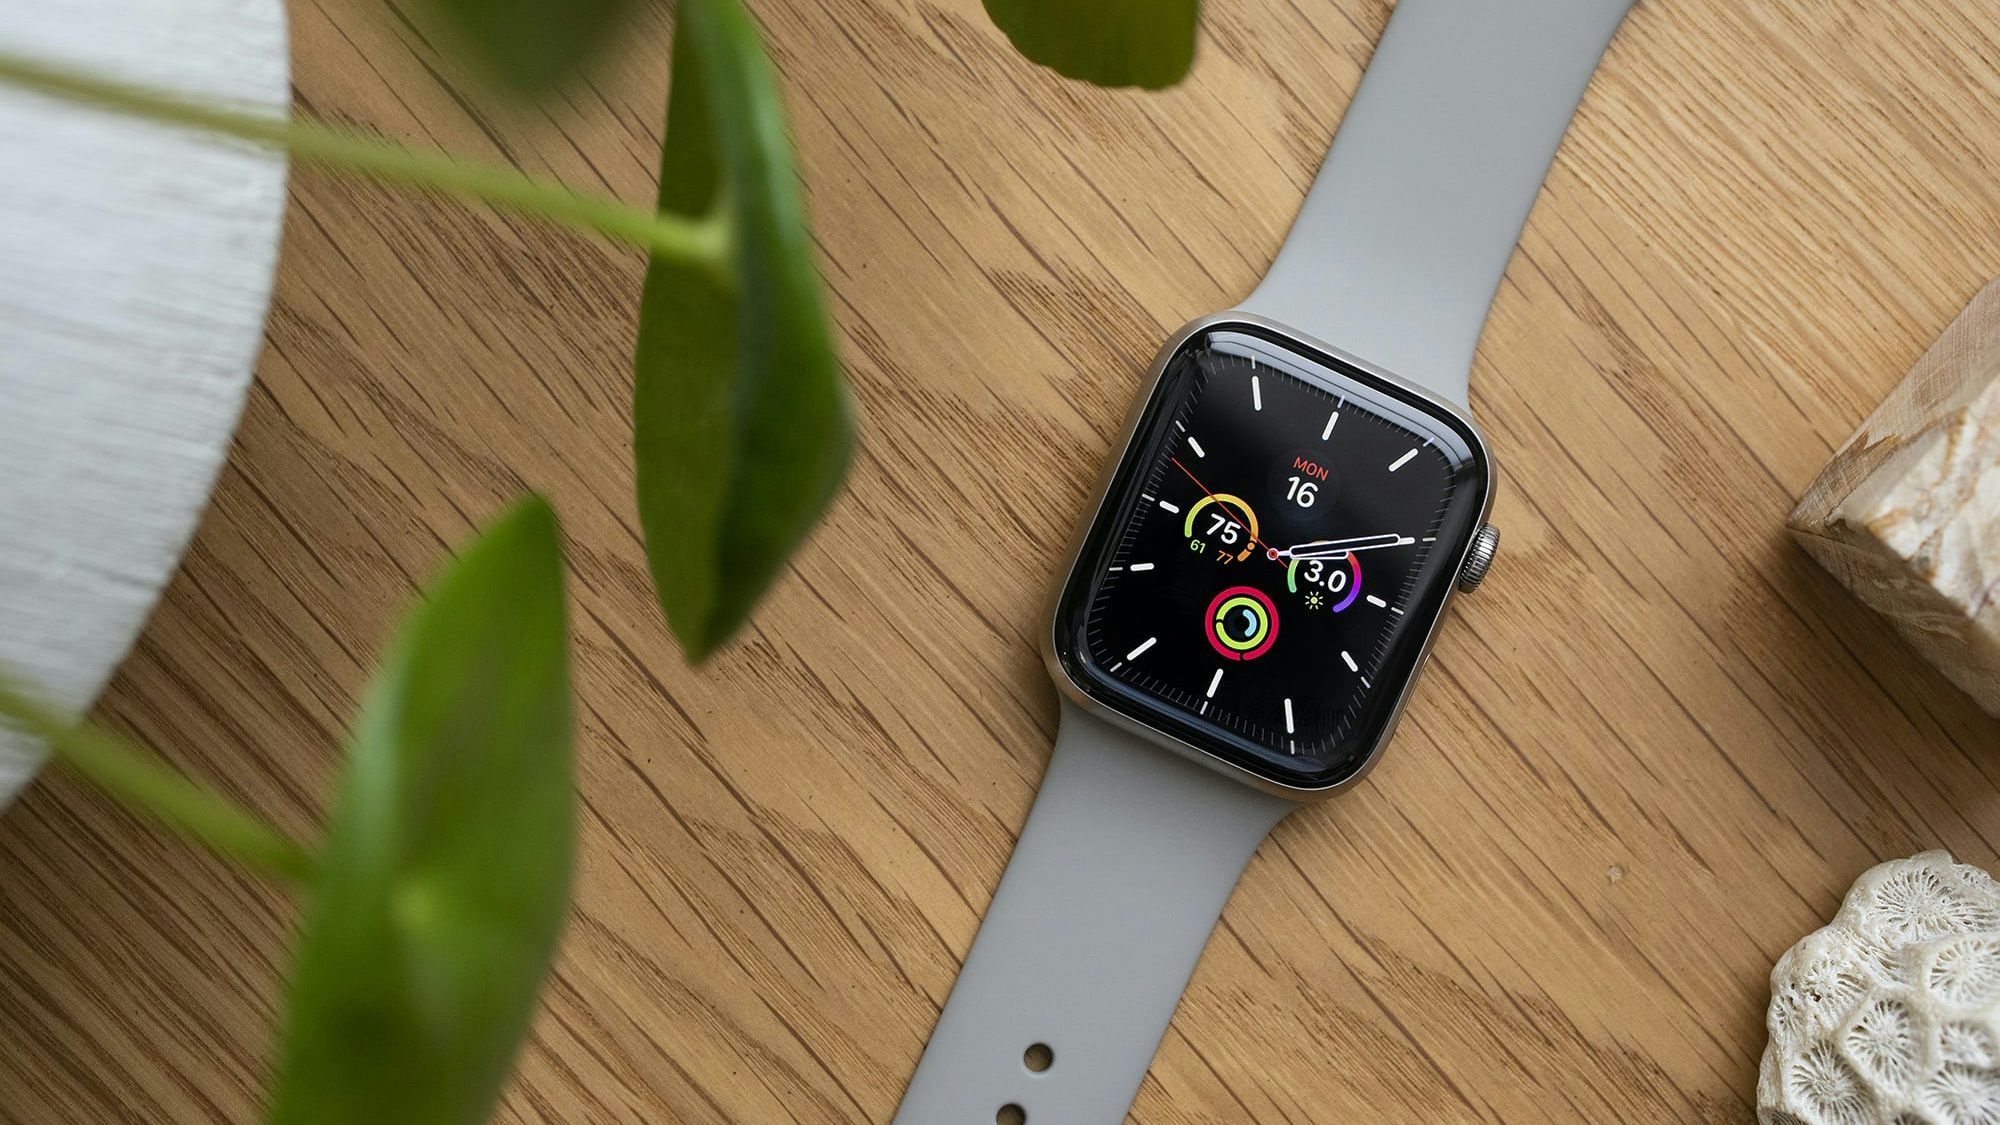 A Week On The Wrist: The Apple Watch Series 3 Edition - Hodinkee